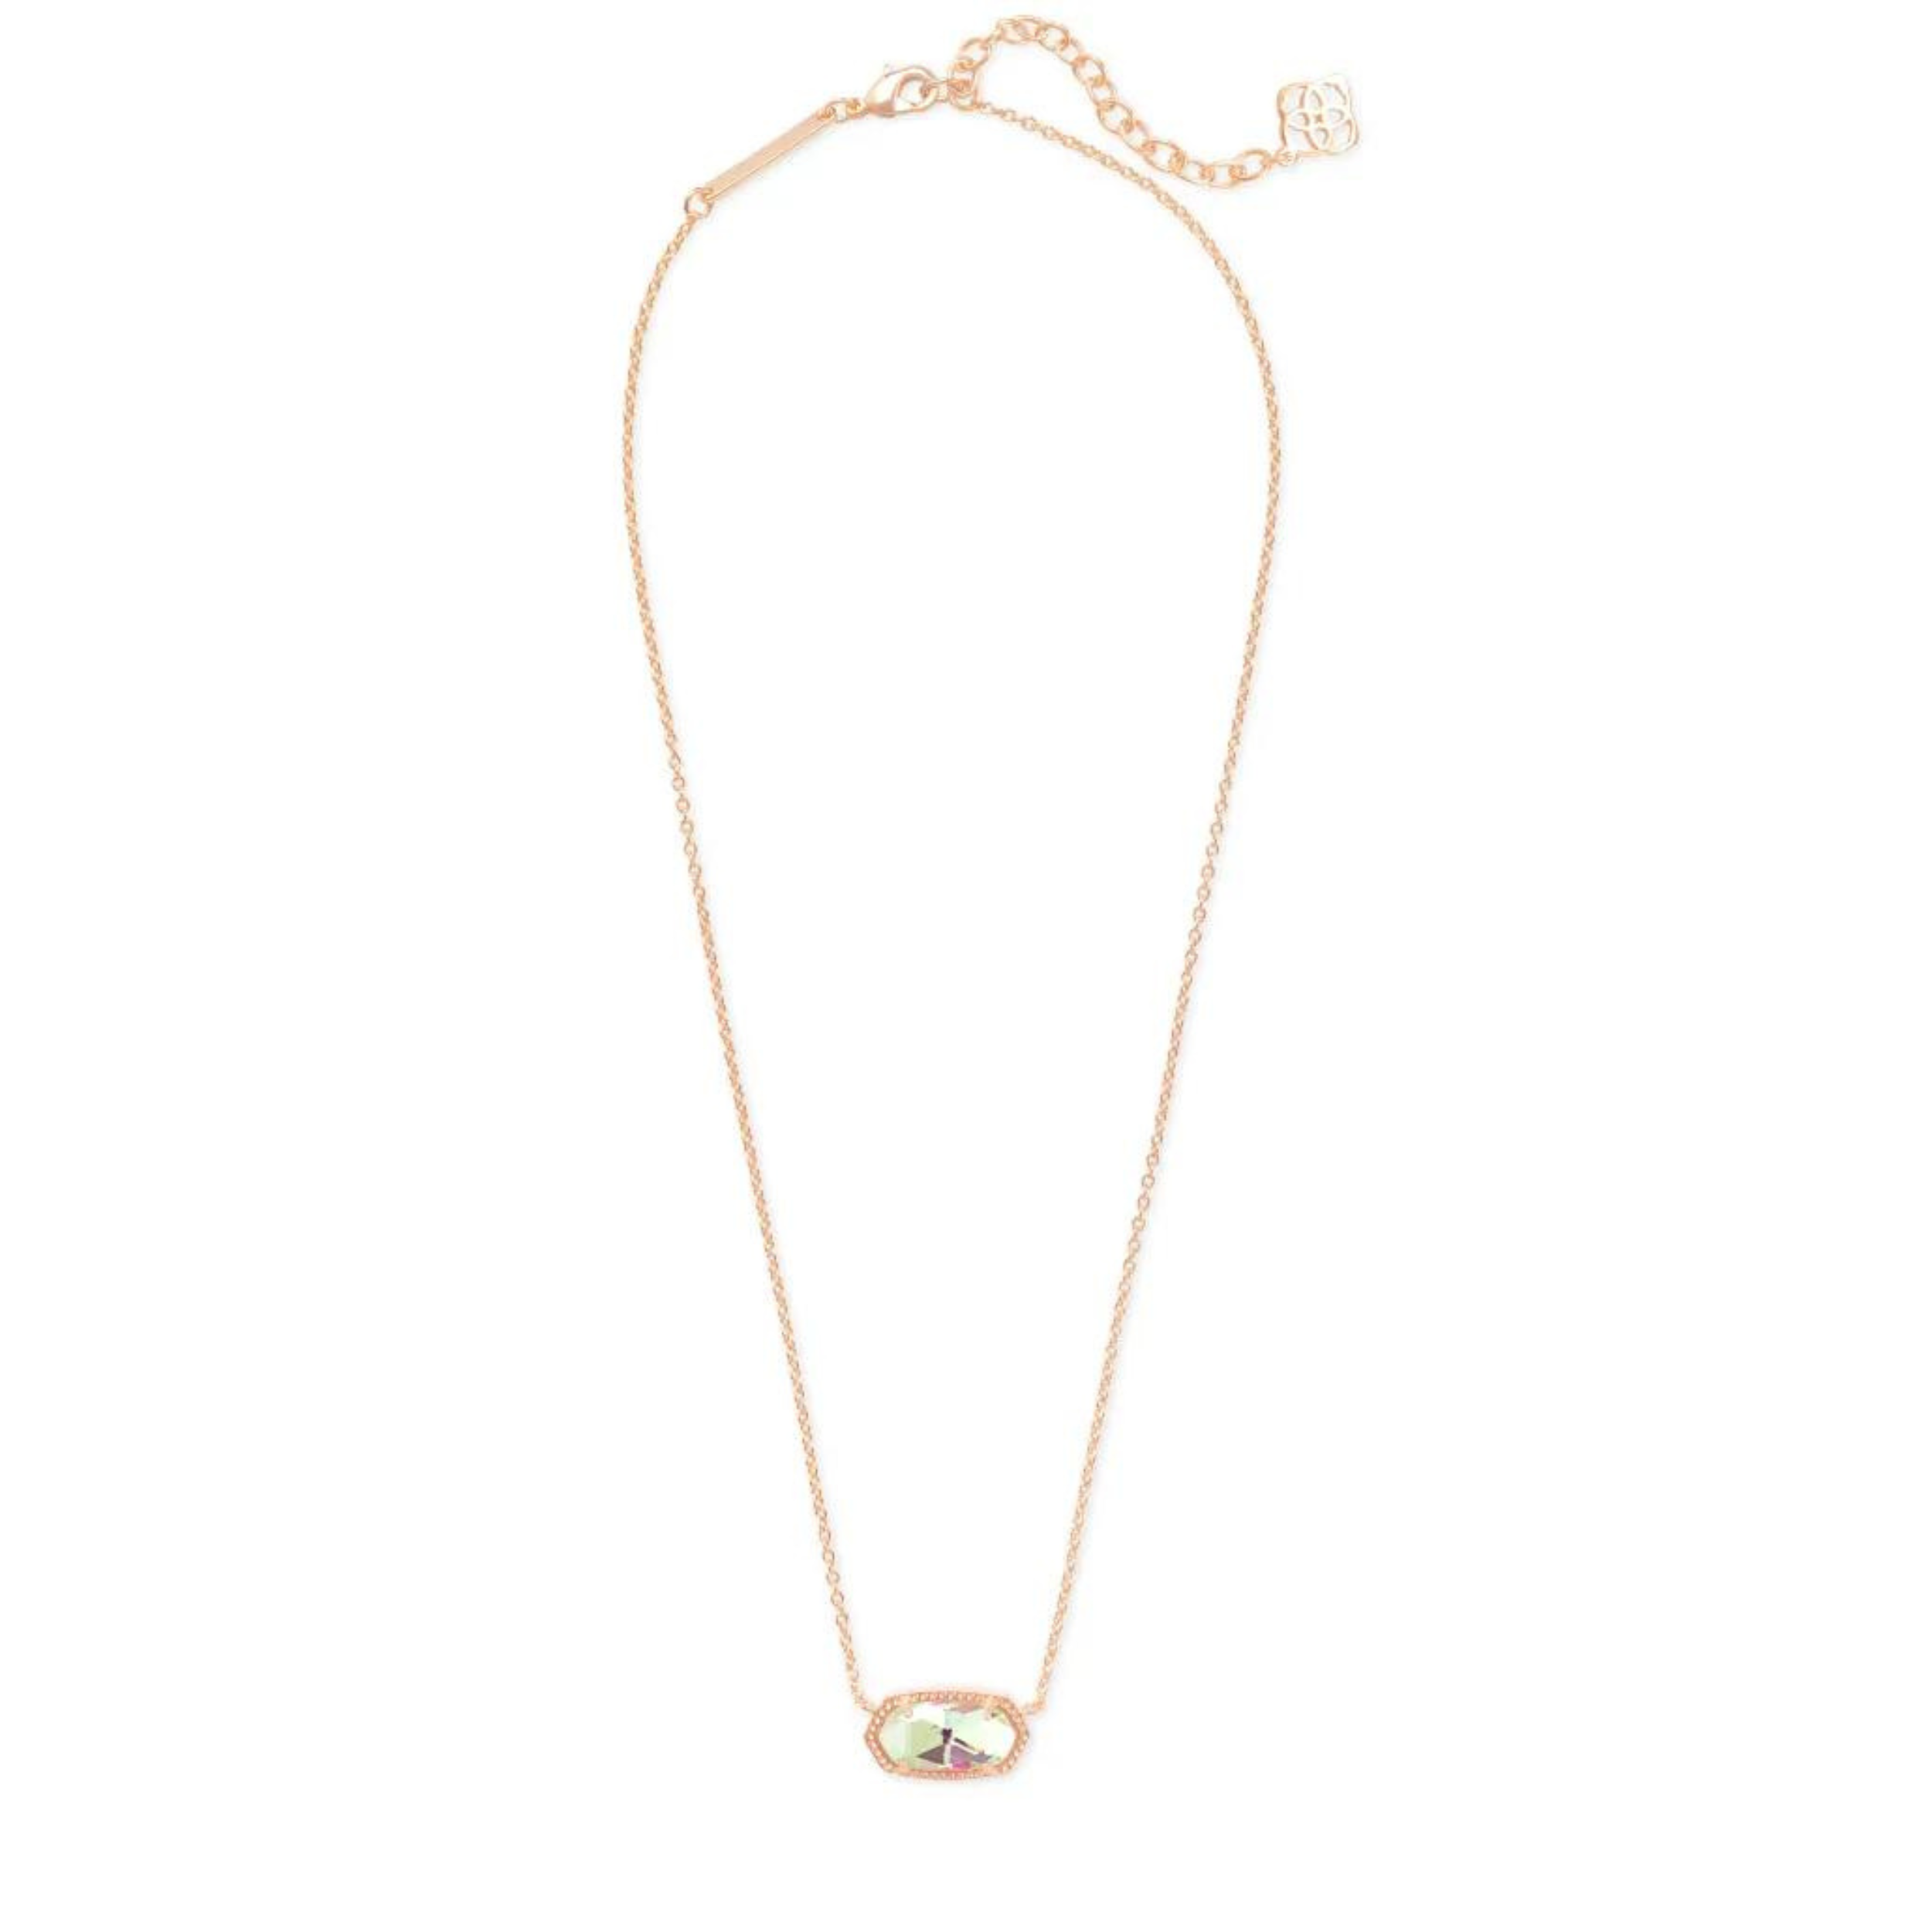 Kendra Scott | Elisa Rose Gold Pendant Necklace in Dichroic Glass - Giddy Up Glamour Boutique